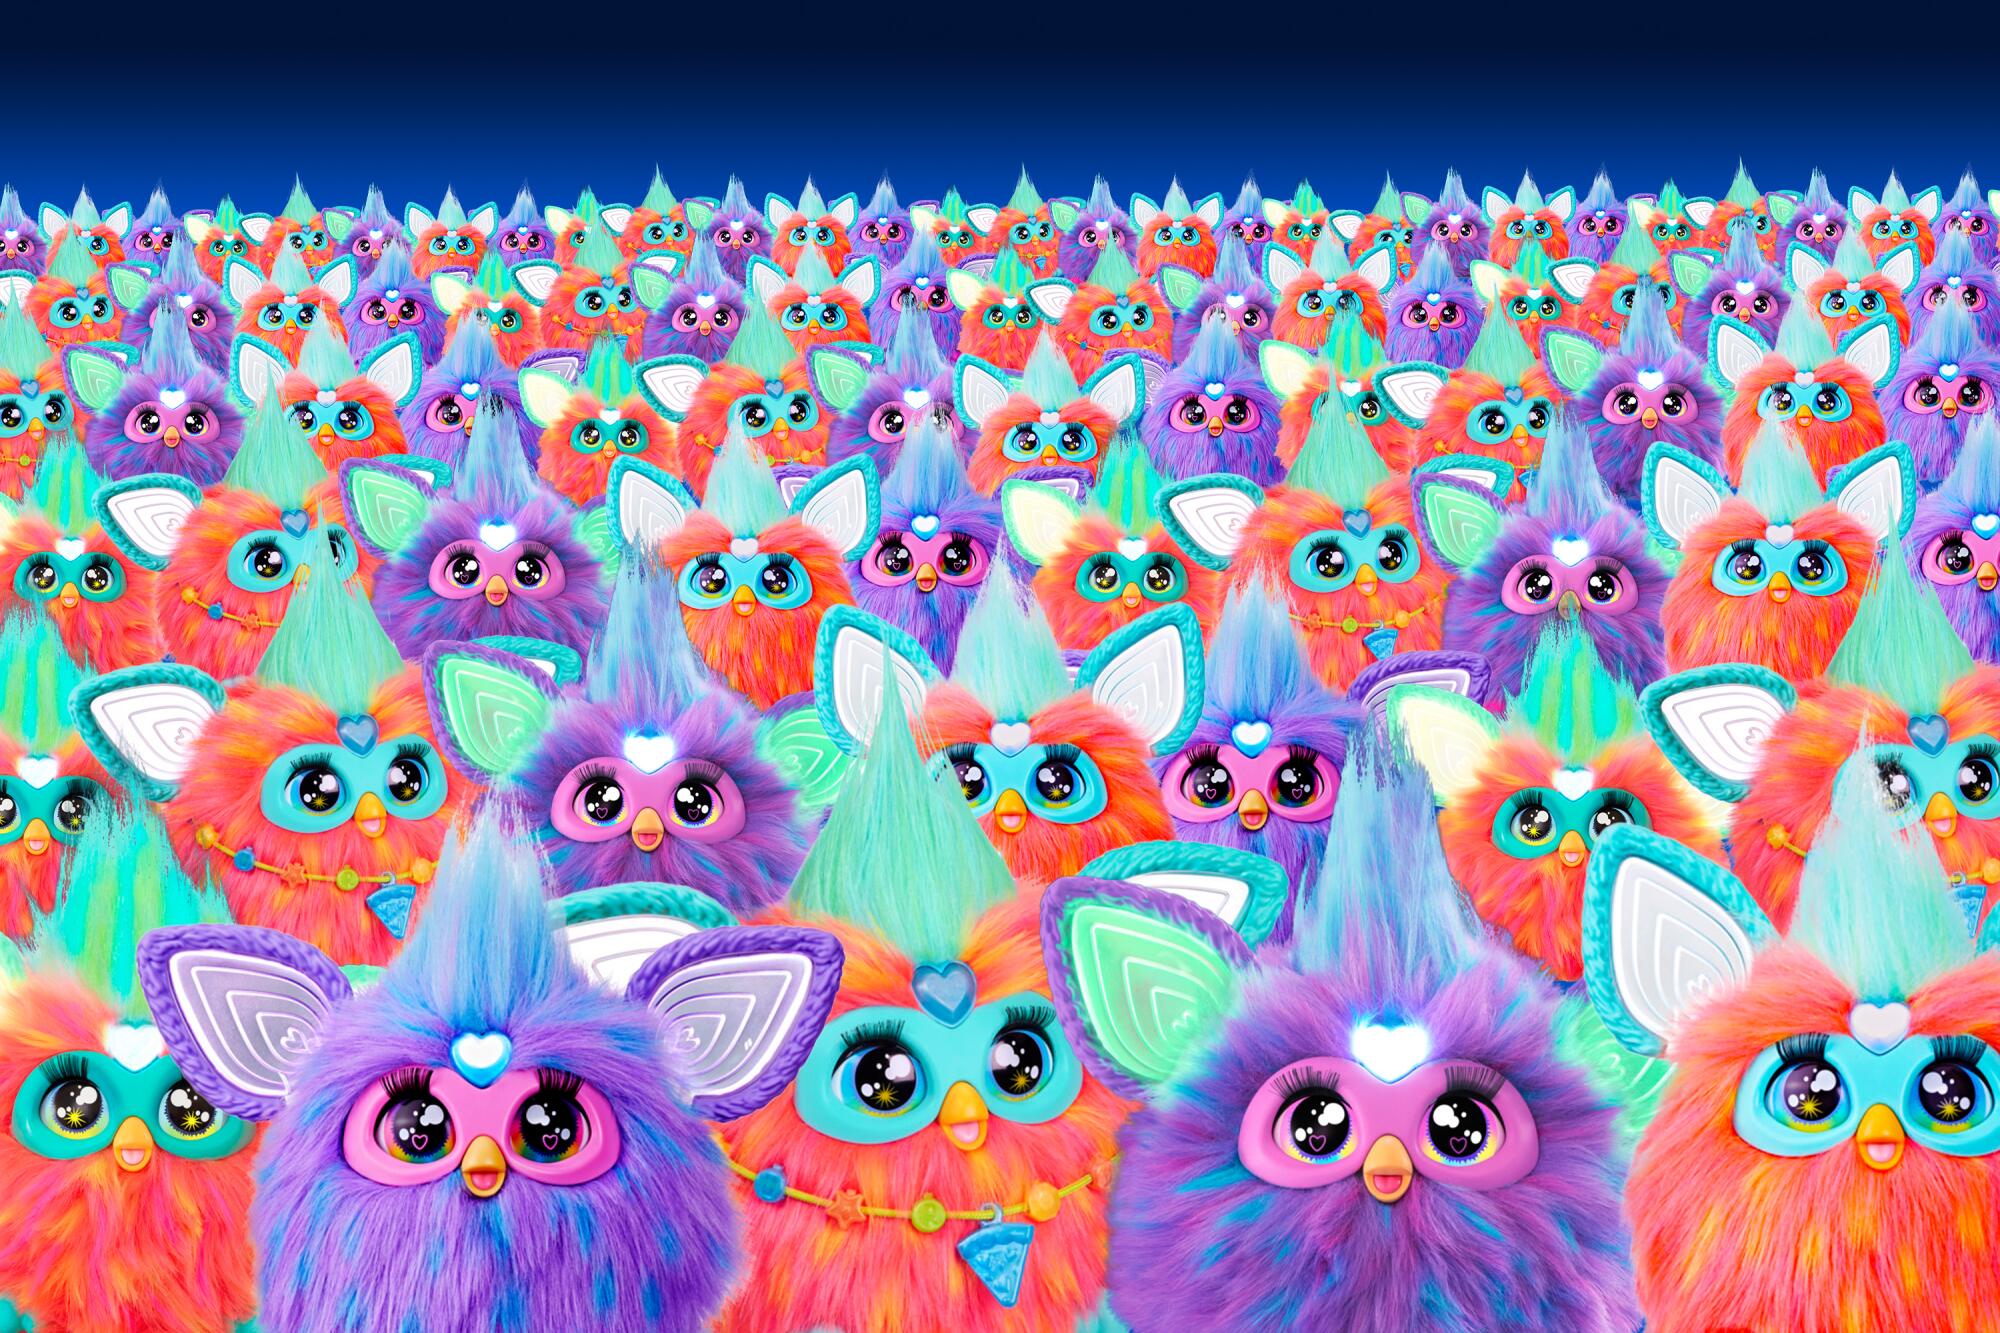 Comparing Furby 2023 Coral and Purple Models 